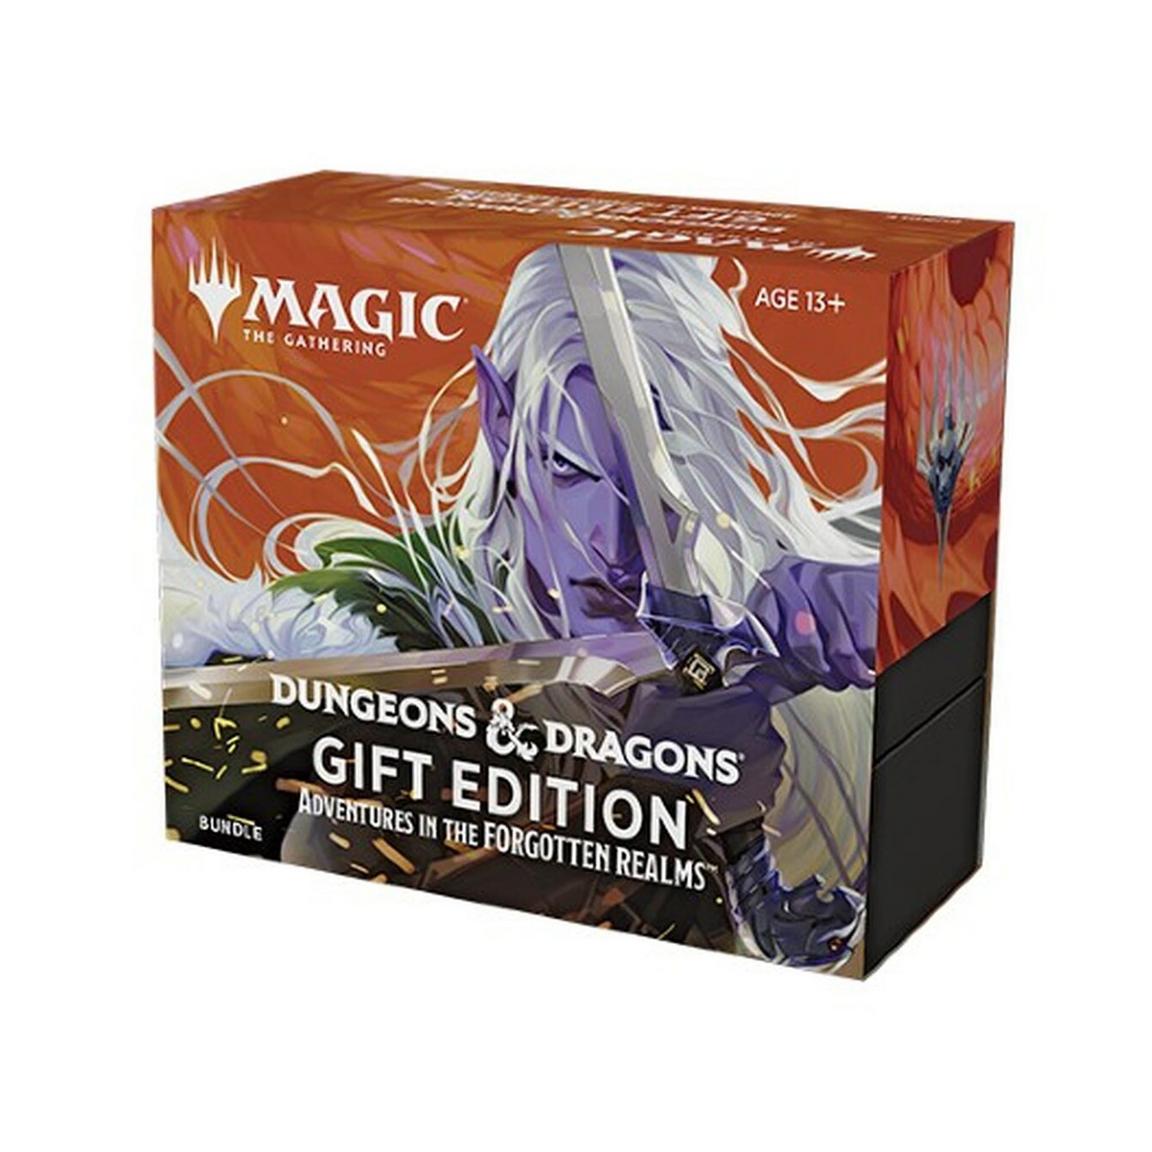 Magic the Gathering: Adventures in the Forgotten Realms (Dungeons & Dragons) Bundle Gift Edition